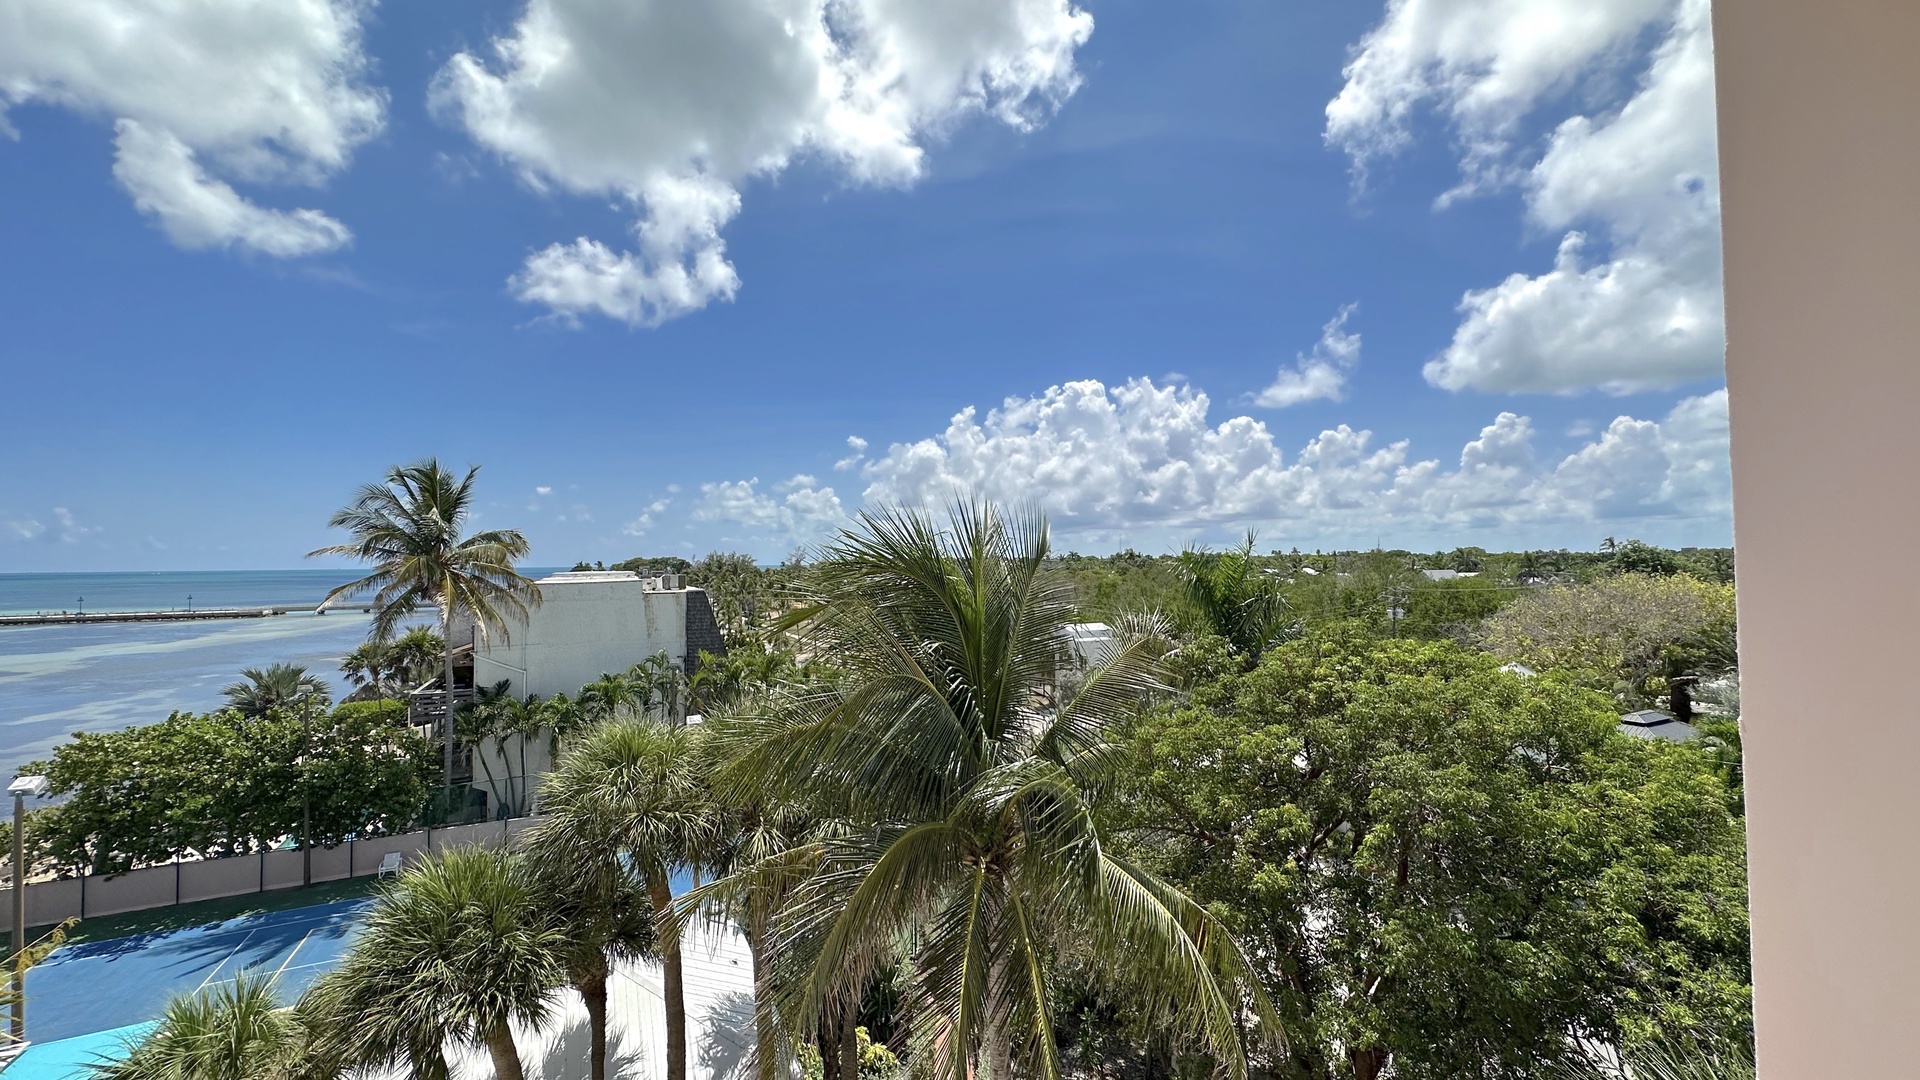 West view from Front Entry Walkway Key West Beach Club Paradise Penthouse #401